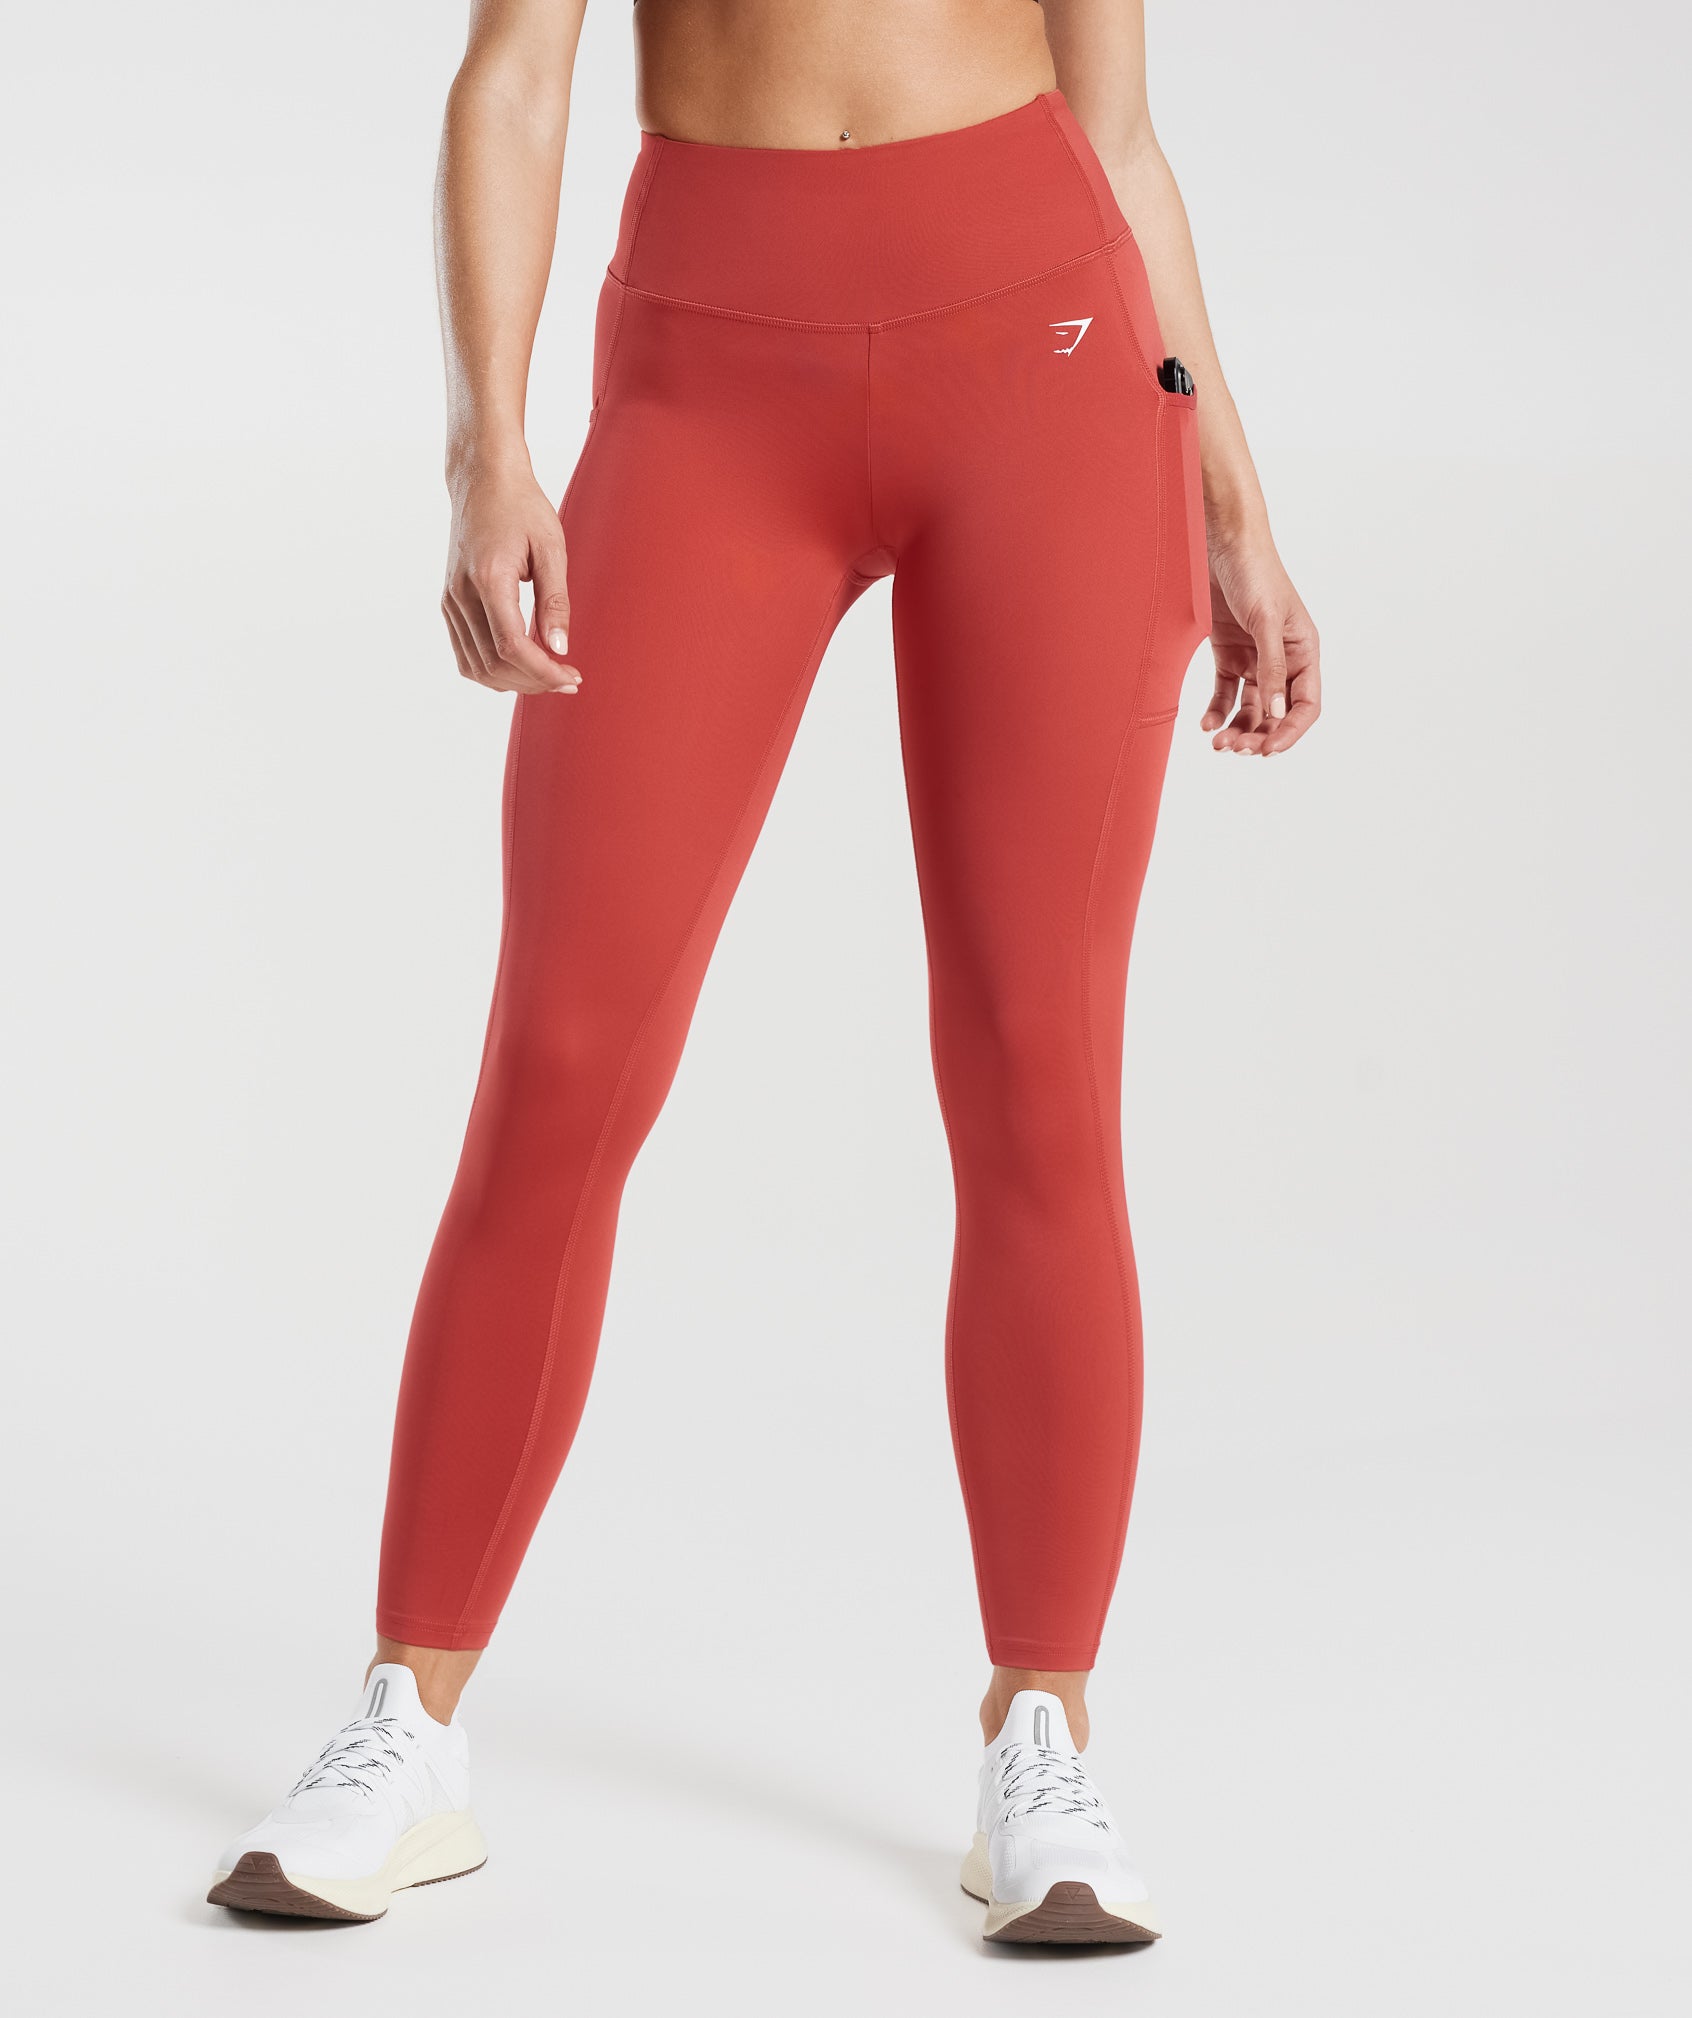 Pocket Leggings in Sundried Red - view 2